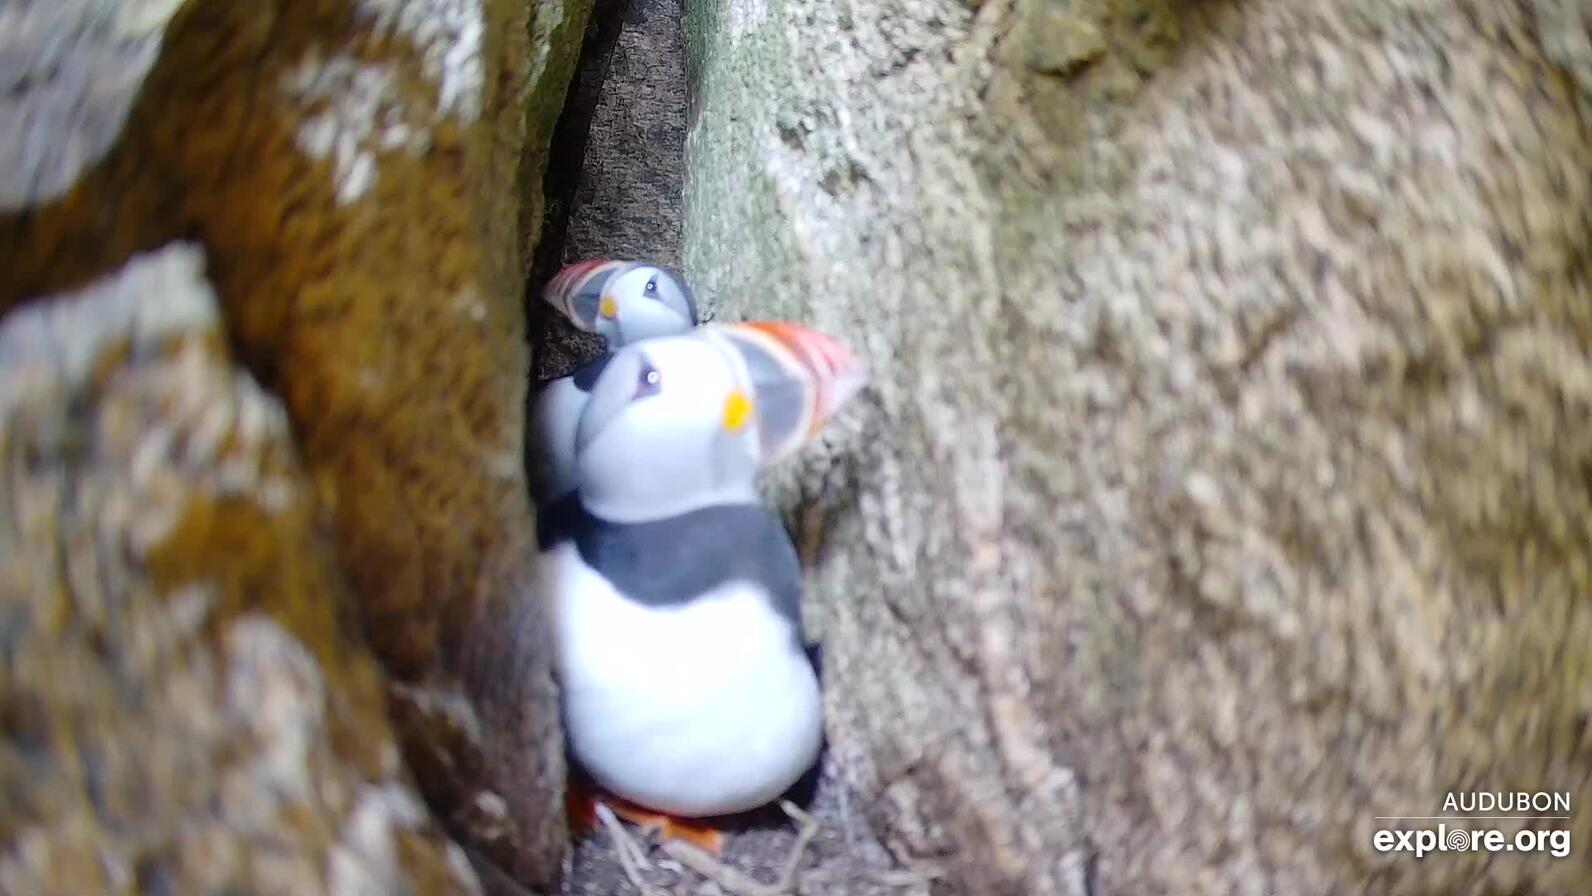 Confused puffins in the Guillemot burrow